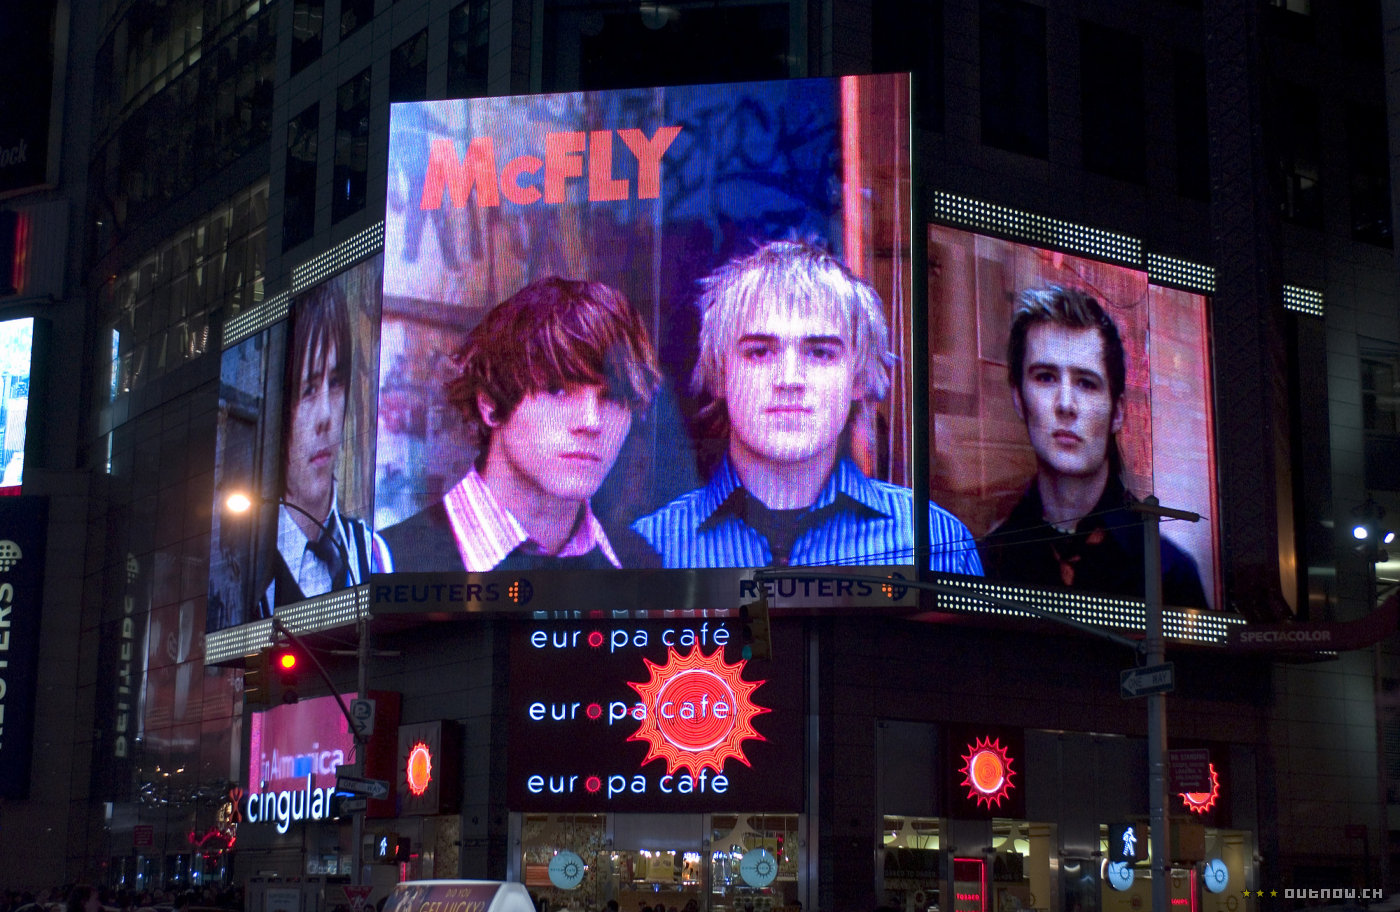 McFly in Just My Luck